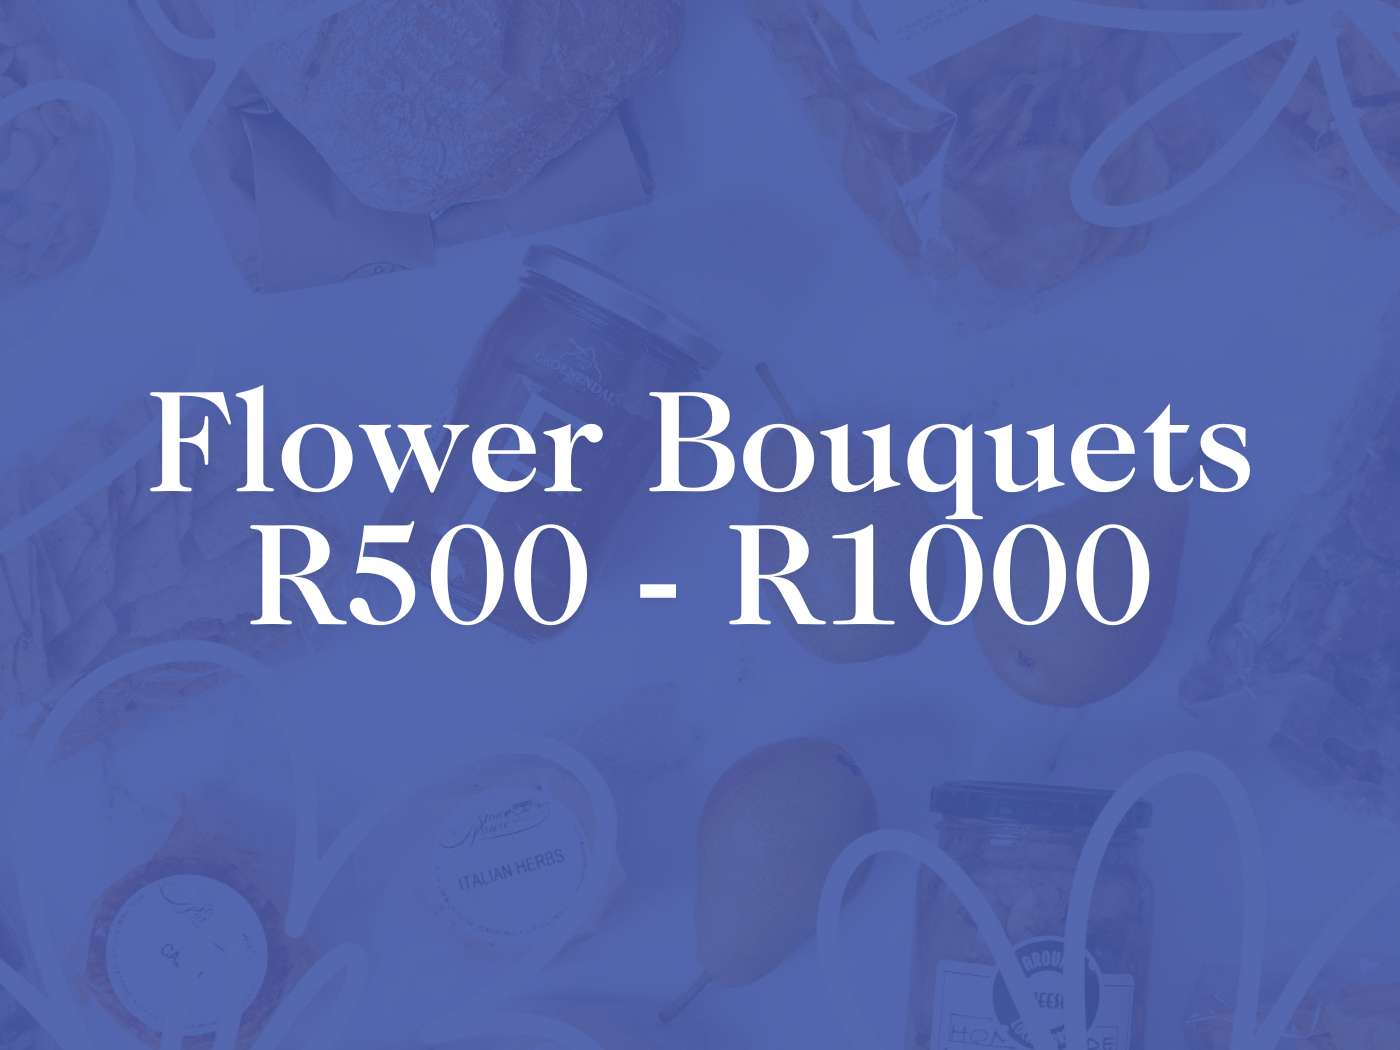 Promotional image for Flower Bouquets priced between R500 and R1000, set against a monochrome blue background with subtle heart shapes and various obscured grocery items. Fabulous Flowers and Gifts.